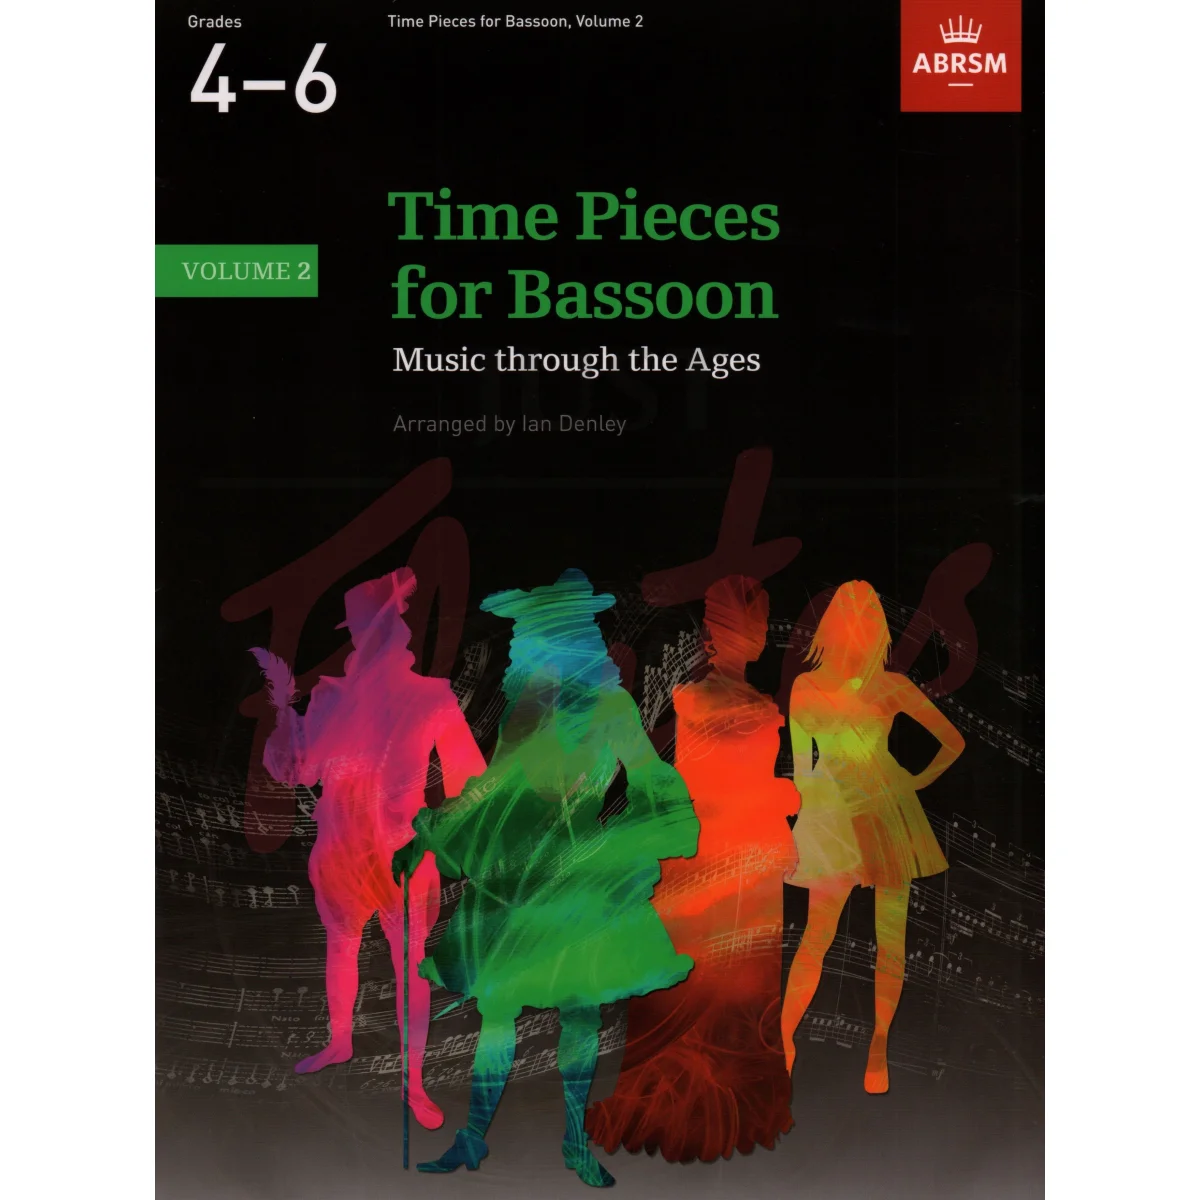 Time Pieces for Bassoon Vol 2